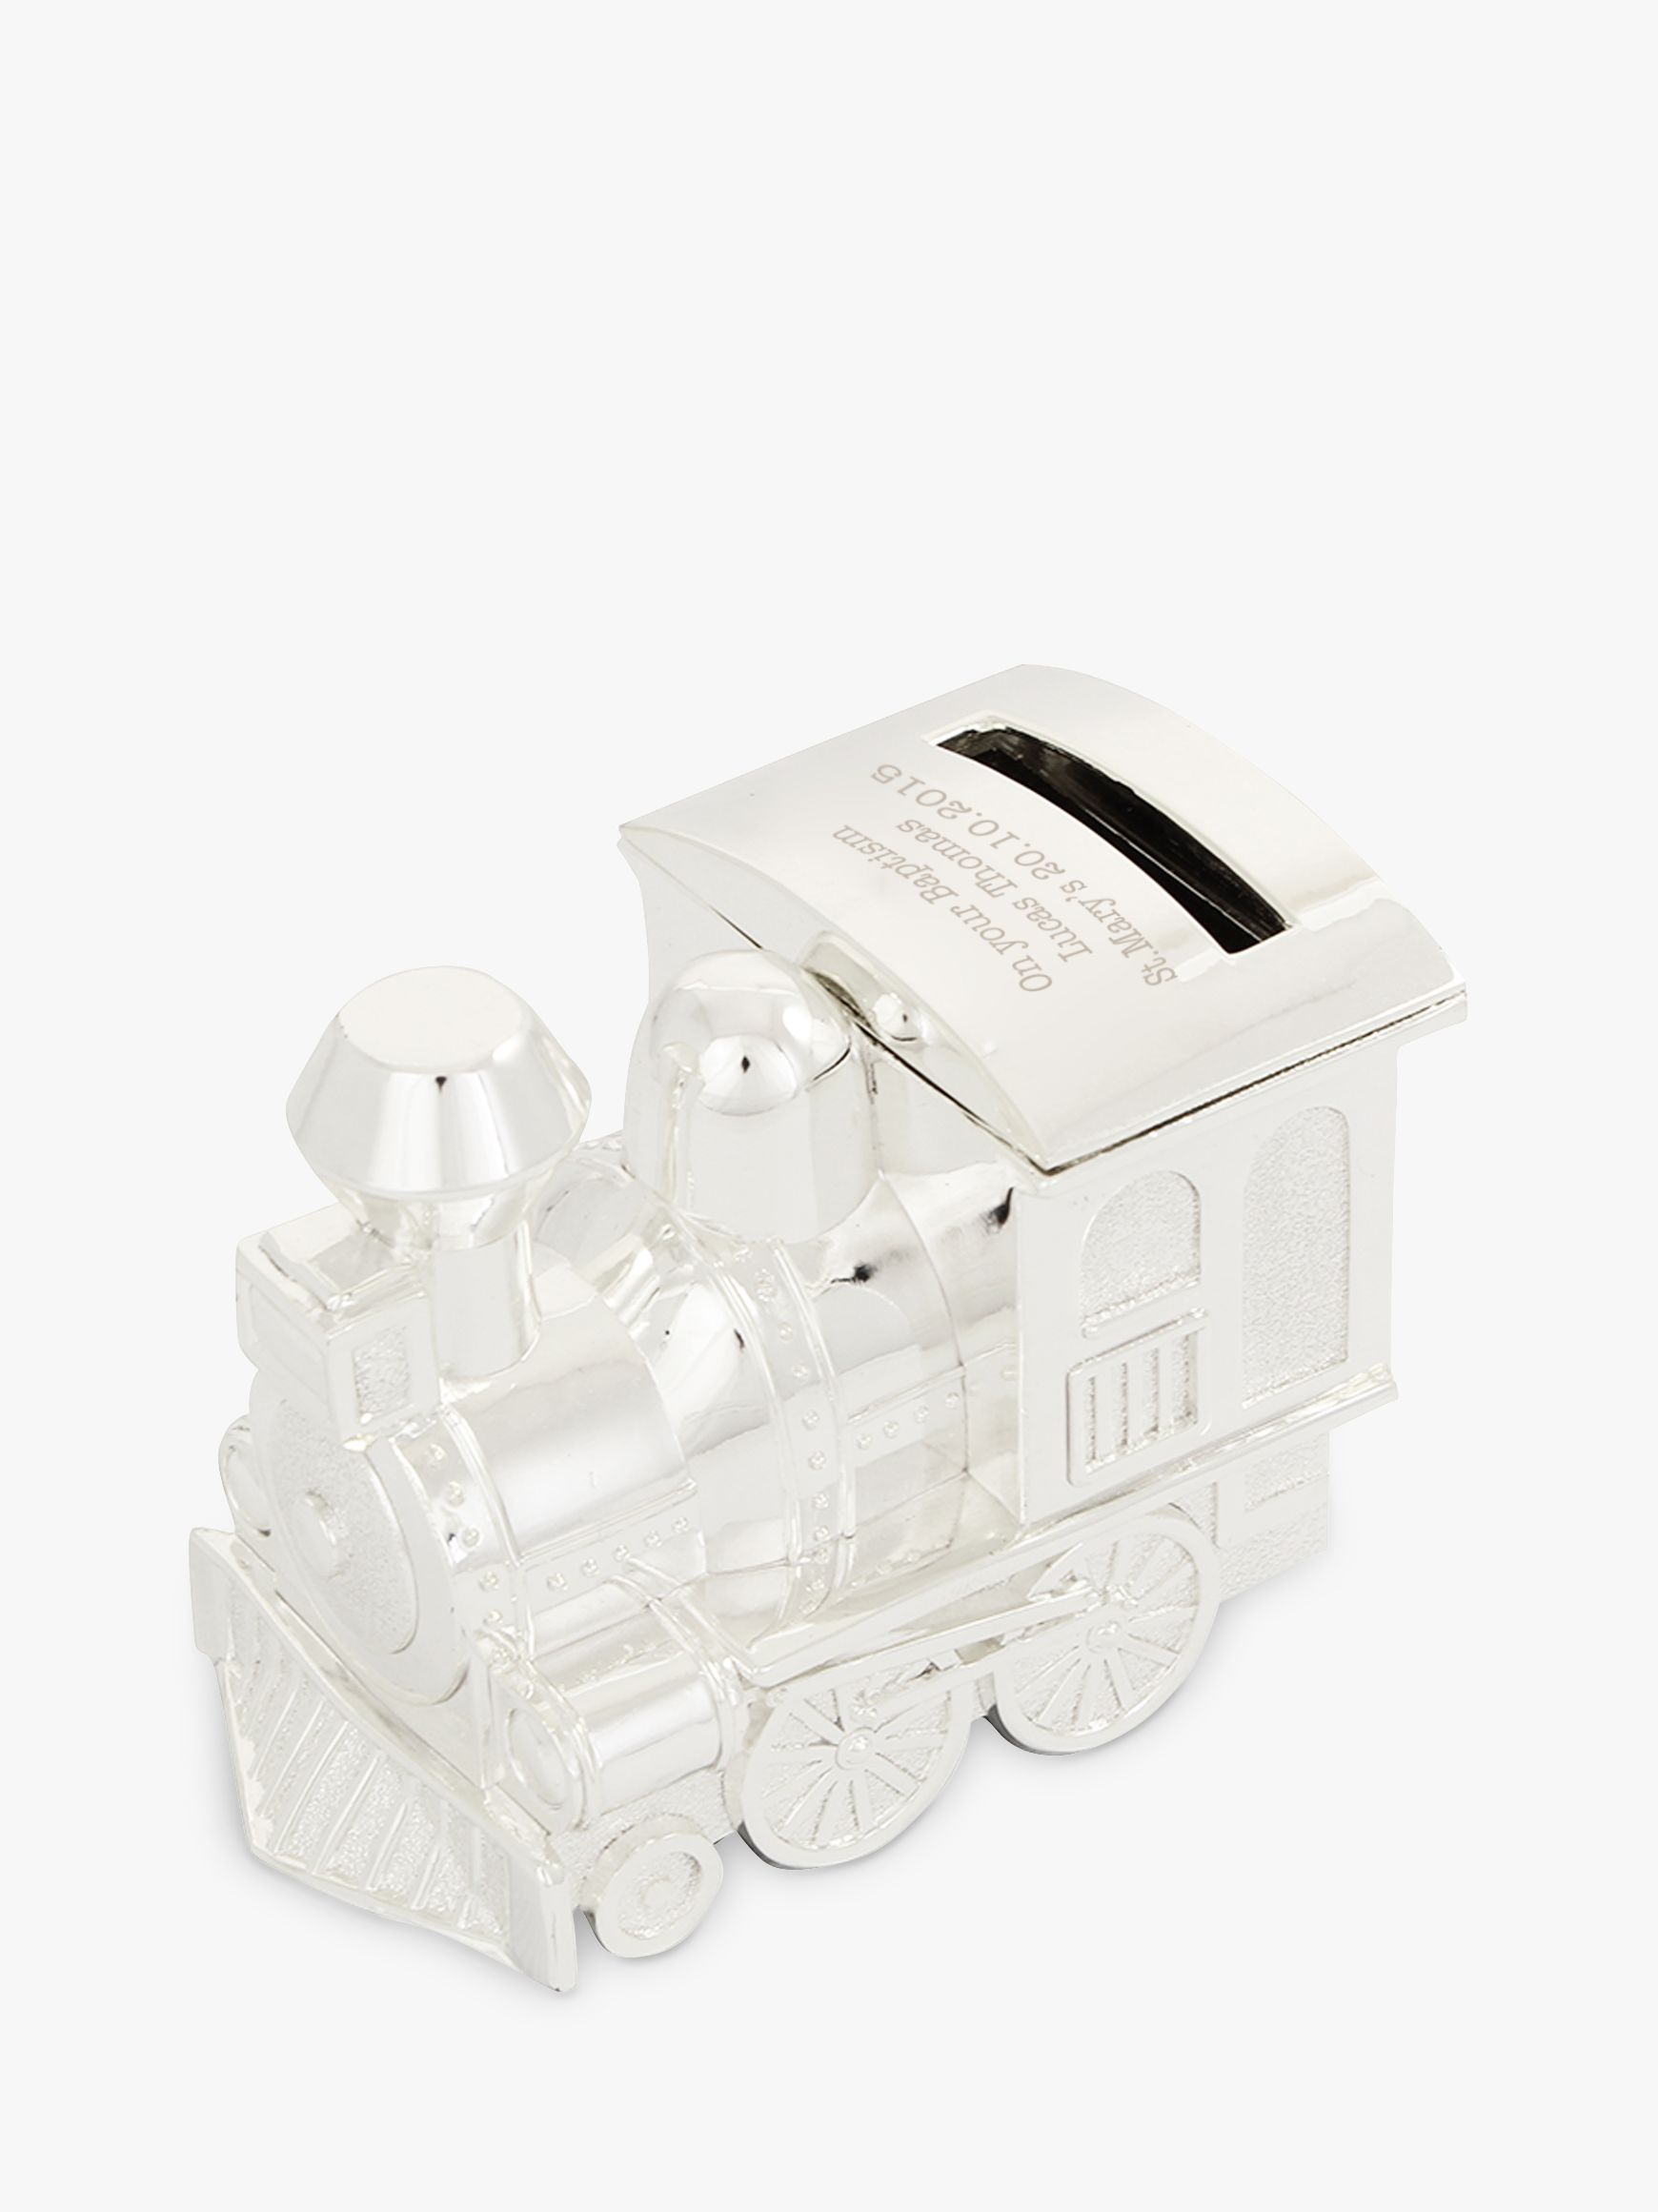 StompStamps Personalised Silver Plated Train Money Box